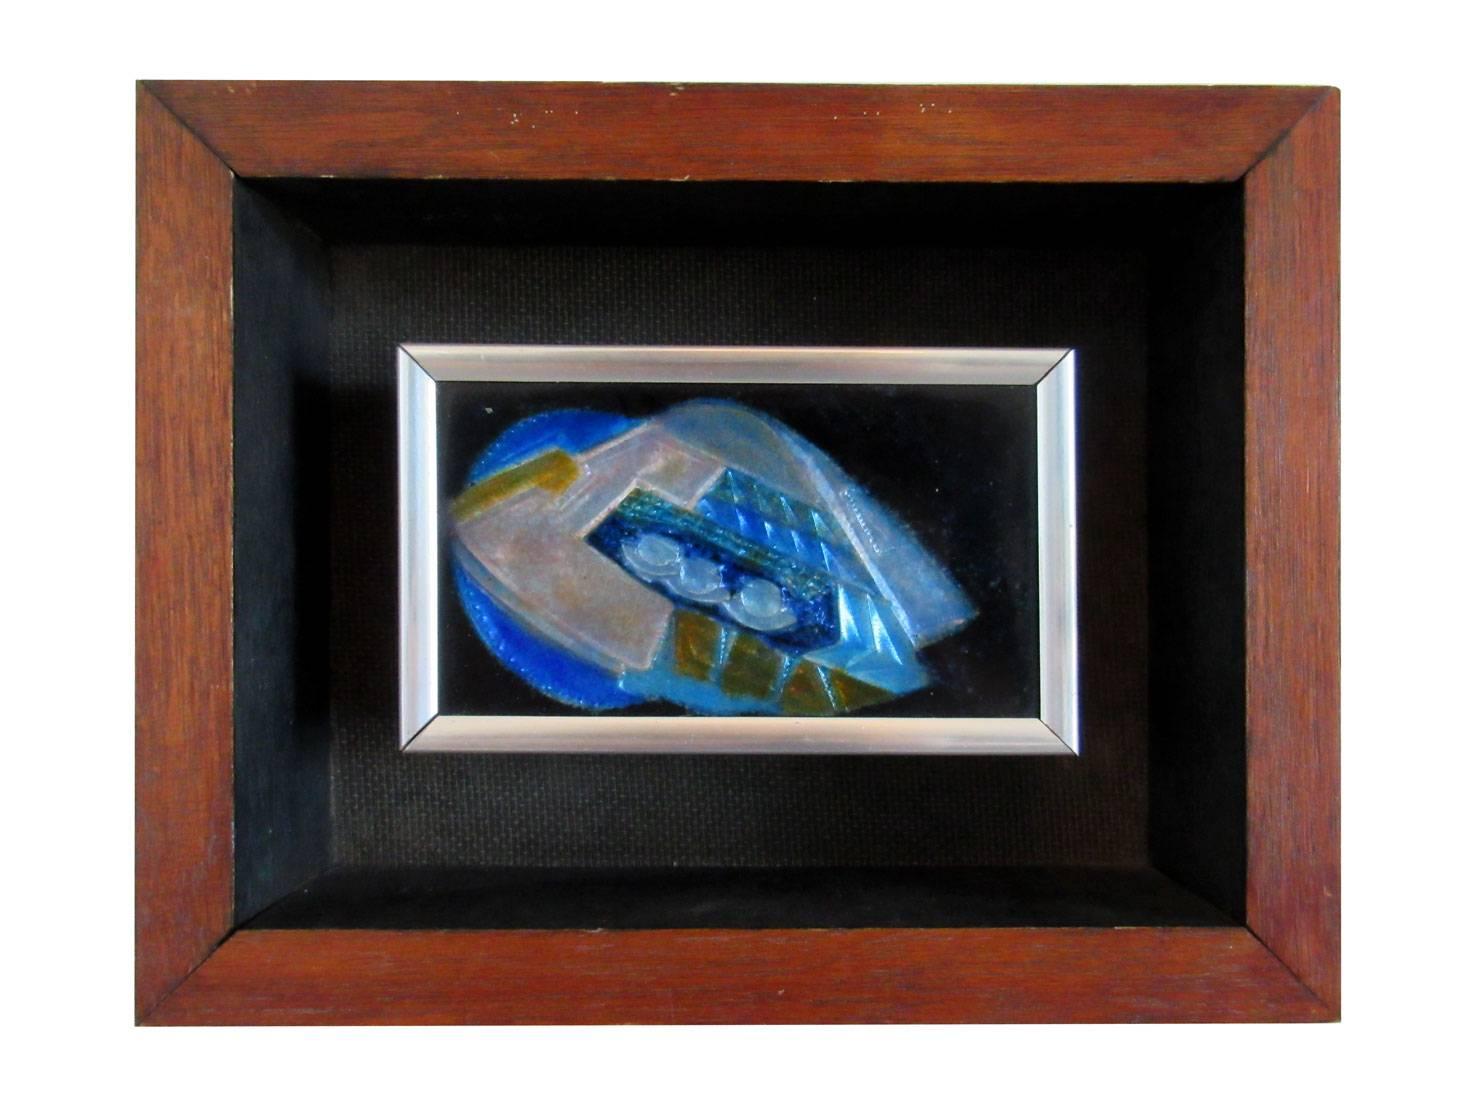 Two individually priced enamel on copper pieces by listed enamellist John Puskas. Both of them are floated within a thick wooden frame, and are signed on the back.